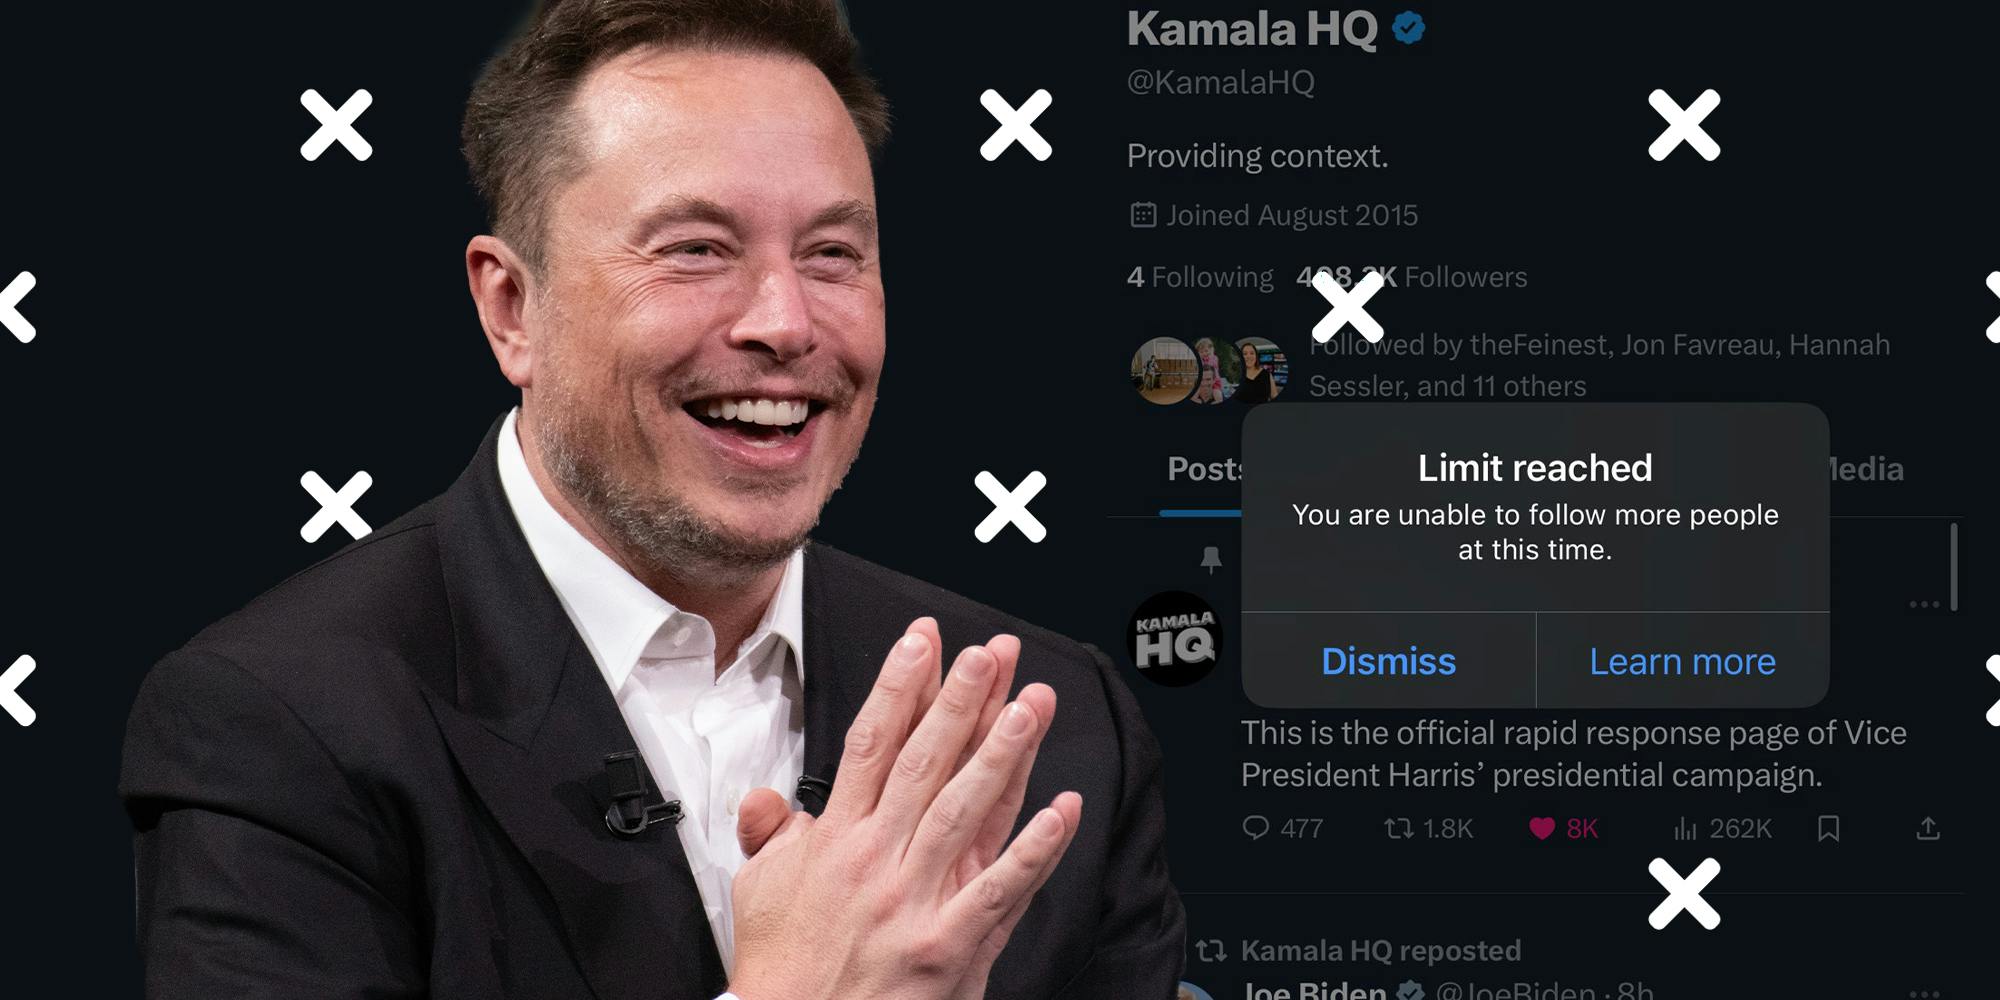 After Musk’s pro-Trump/Vance bender, X users report issues following Kamala Harris’ accounts